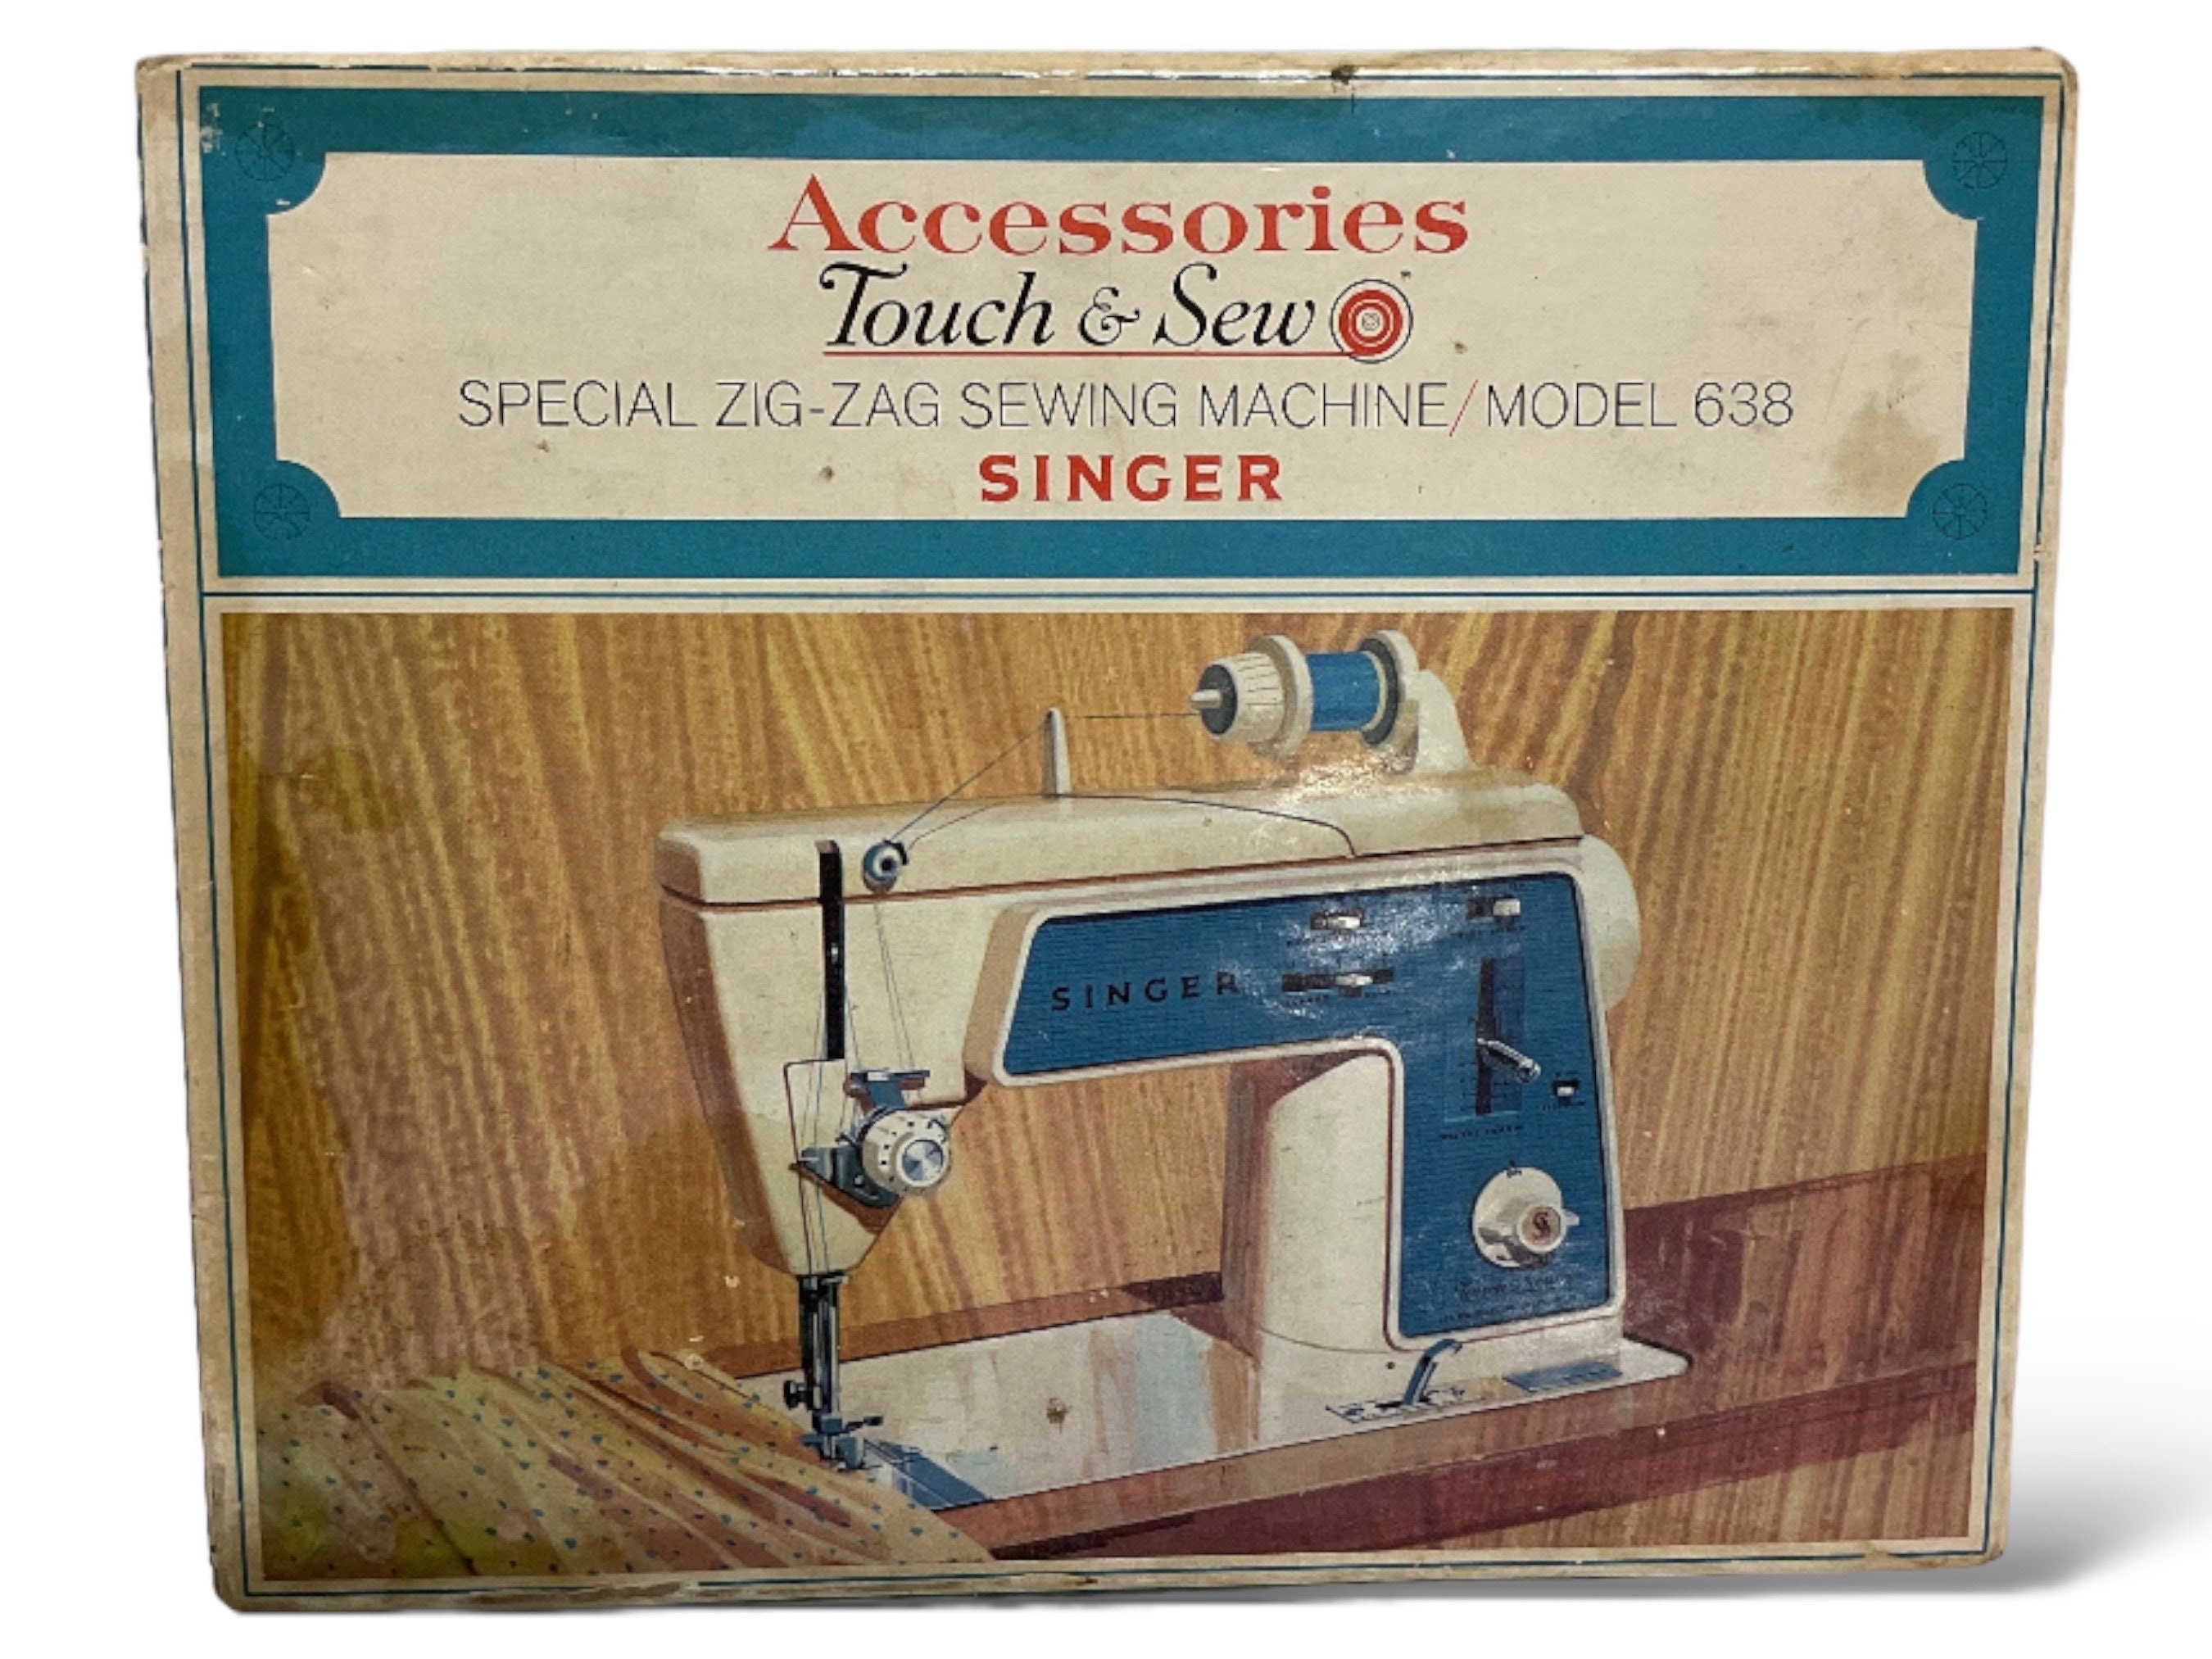 Vintage Singer Touch & Sew Accessories Deluxe Zig Zag Sewing Machine Model  636